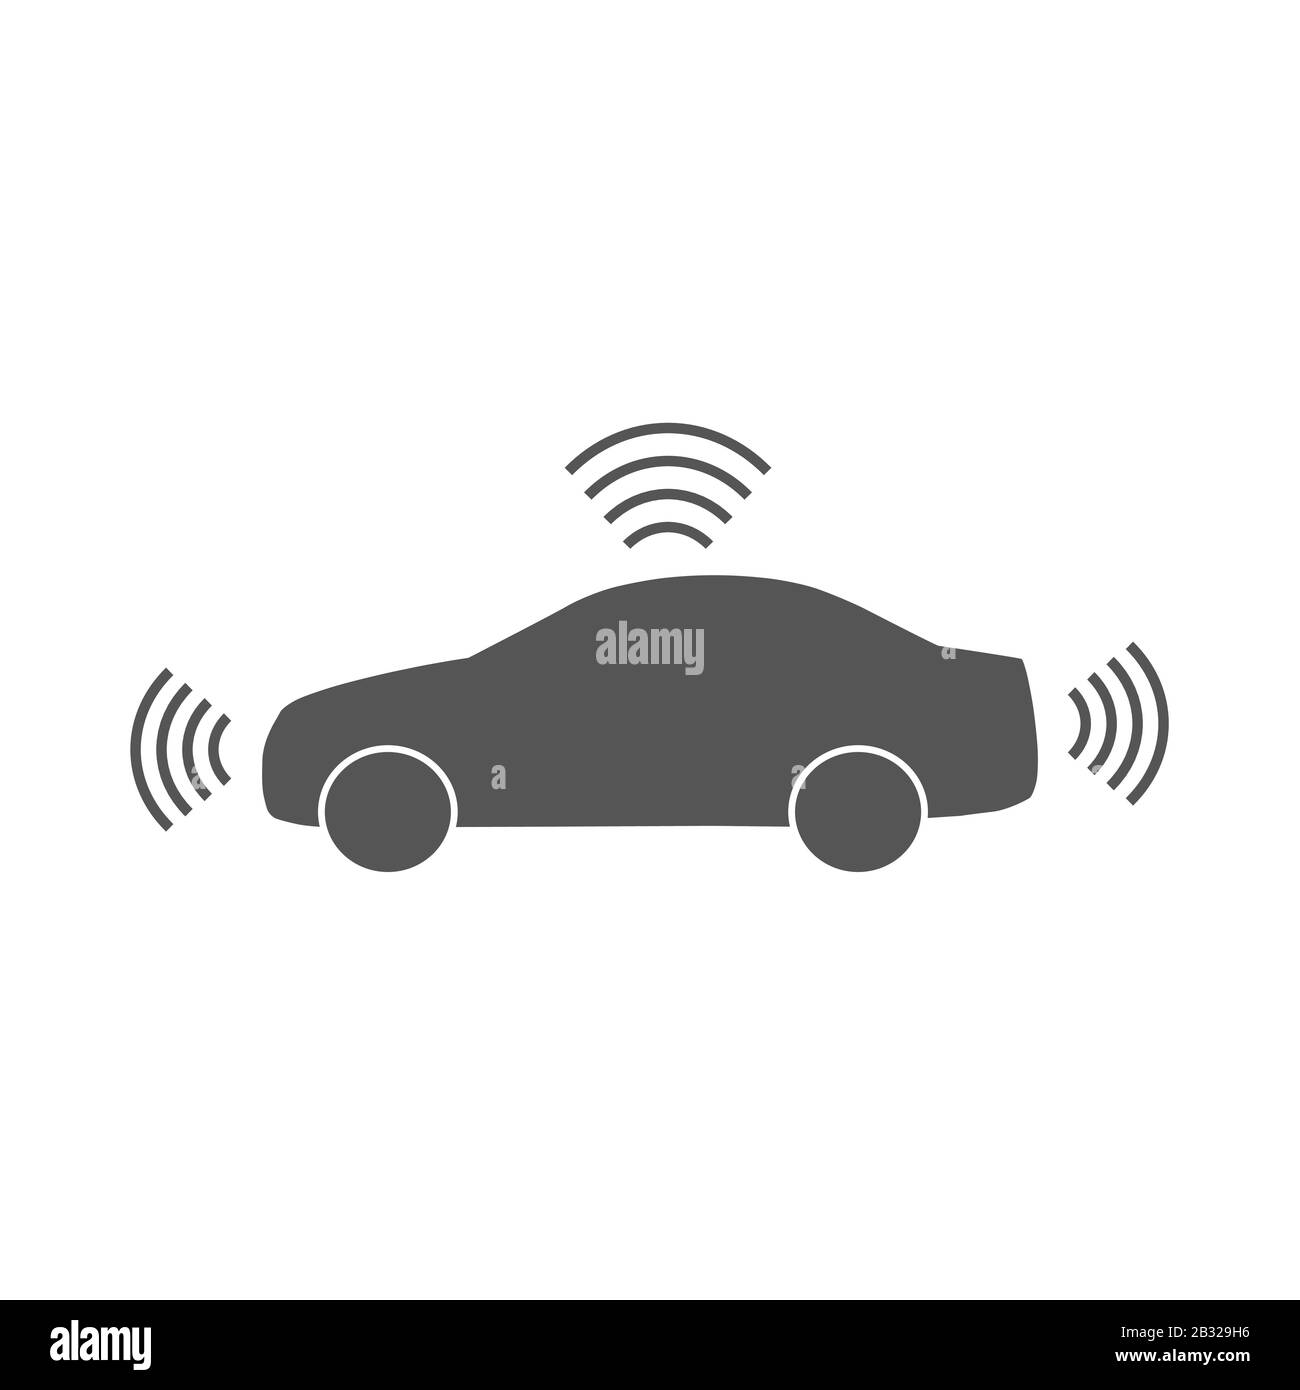 Autonomous car icon isolated on white background. Self-driving vehicle pictogram. Smart car sign with gps signal. Vector. EPS 10. Stock Vector